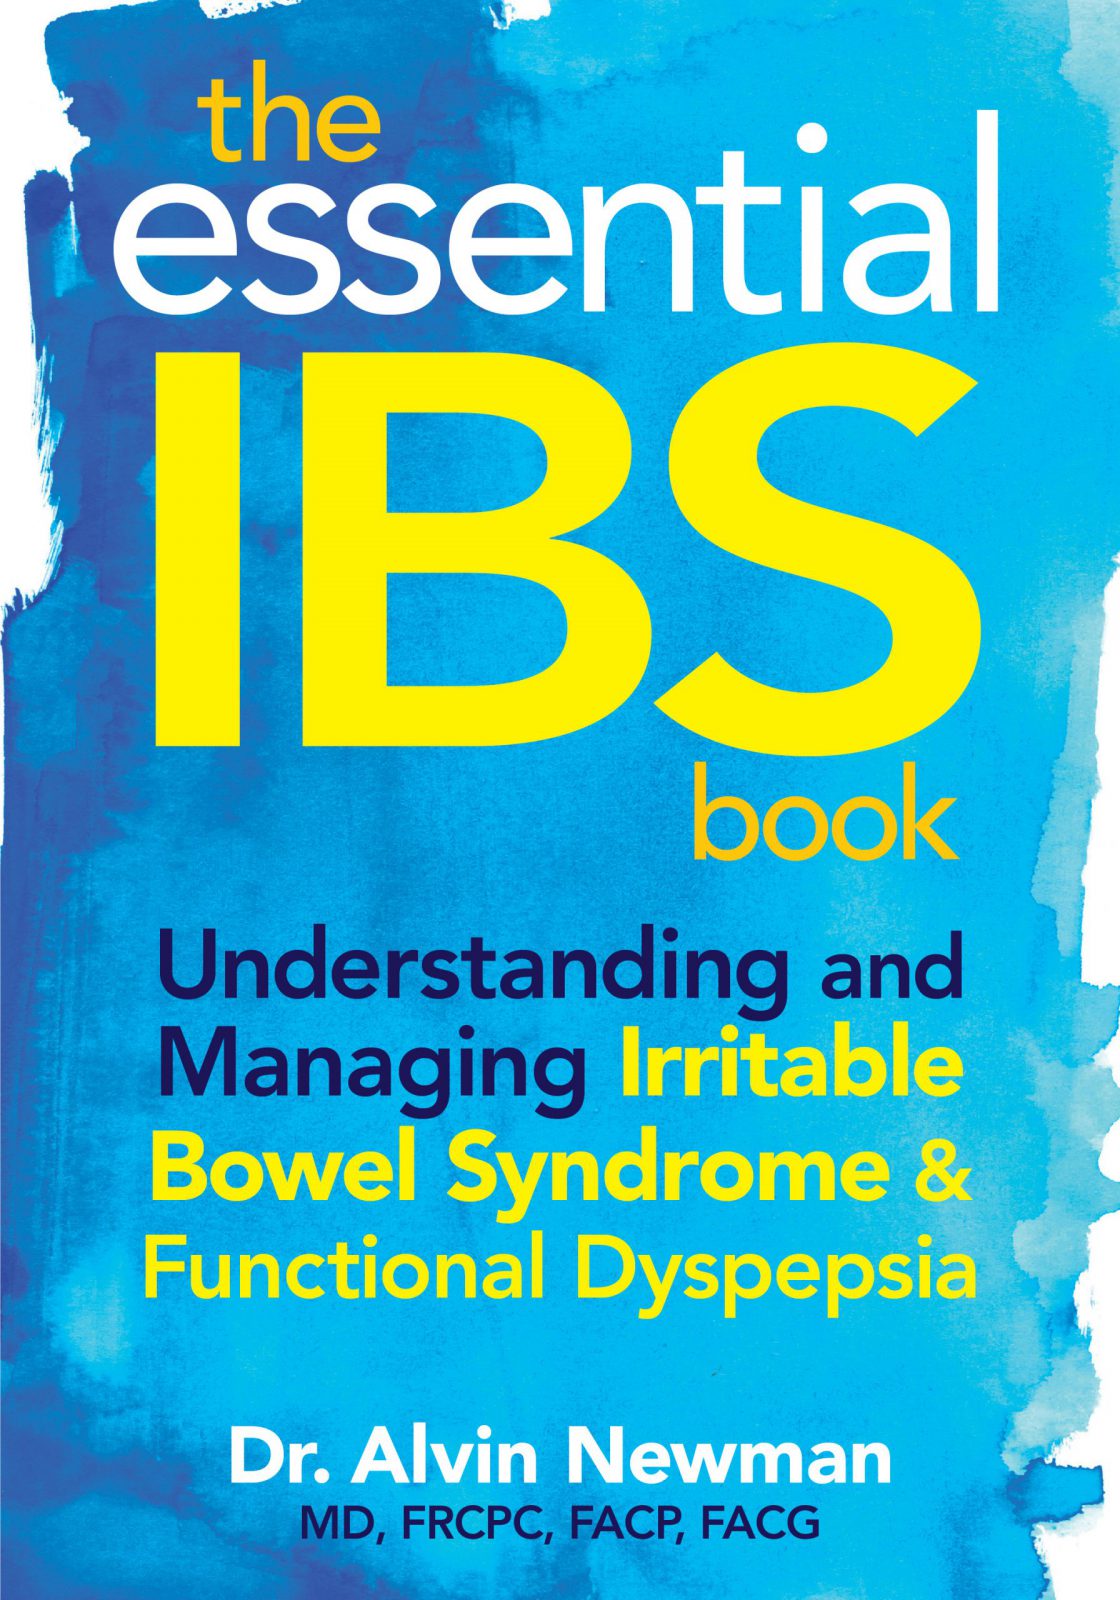 The Essential IBS Book